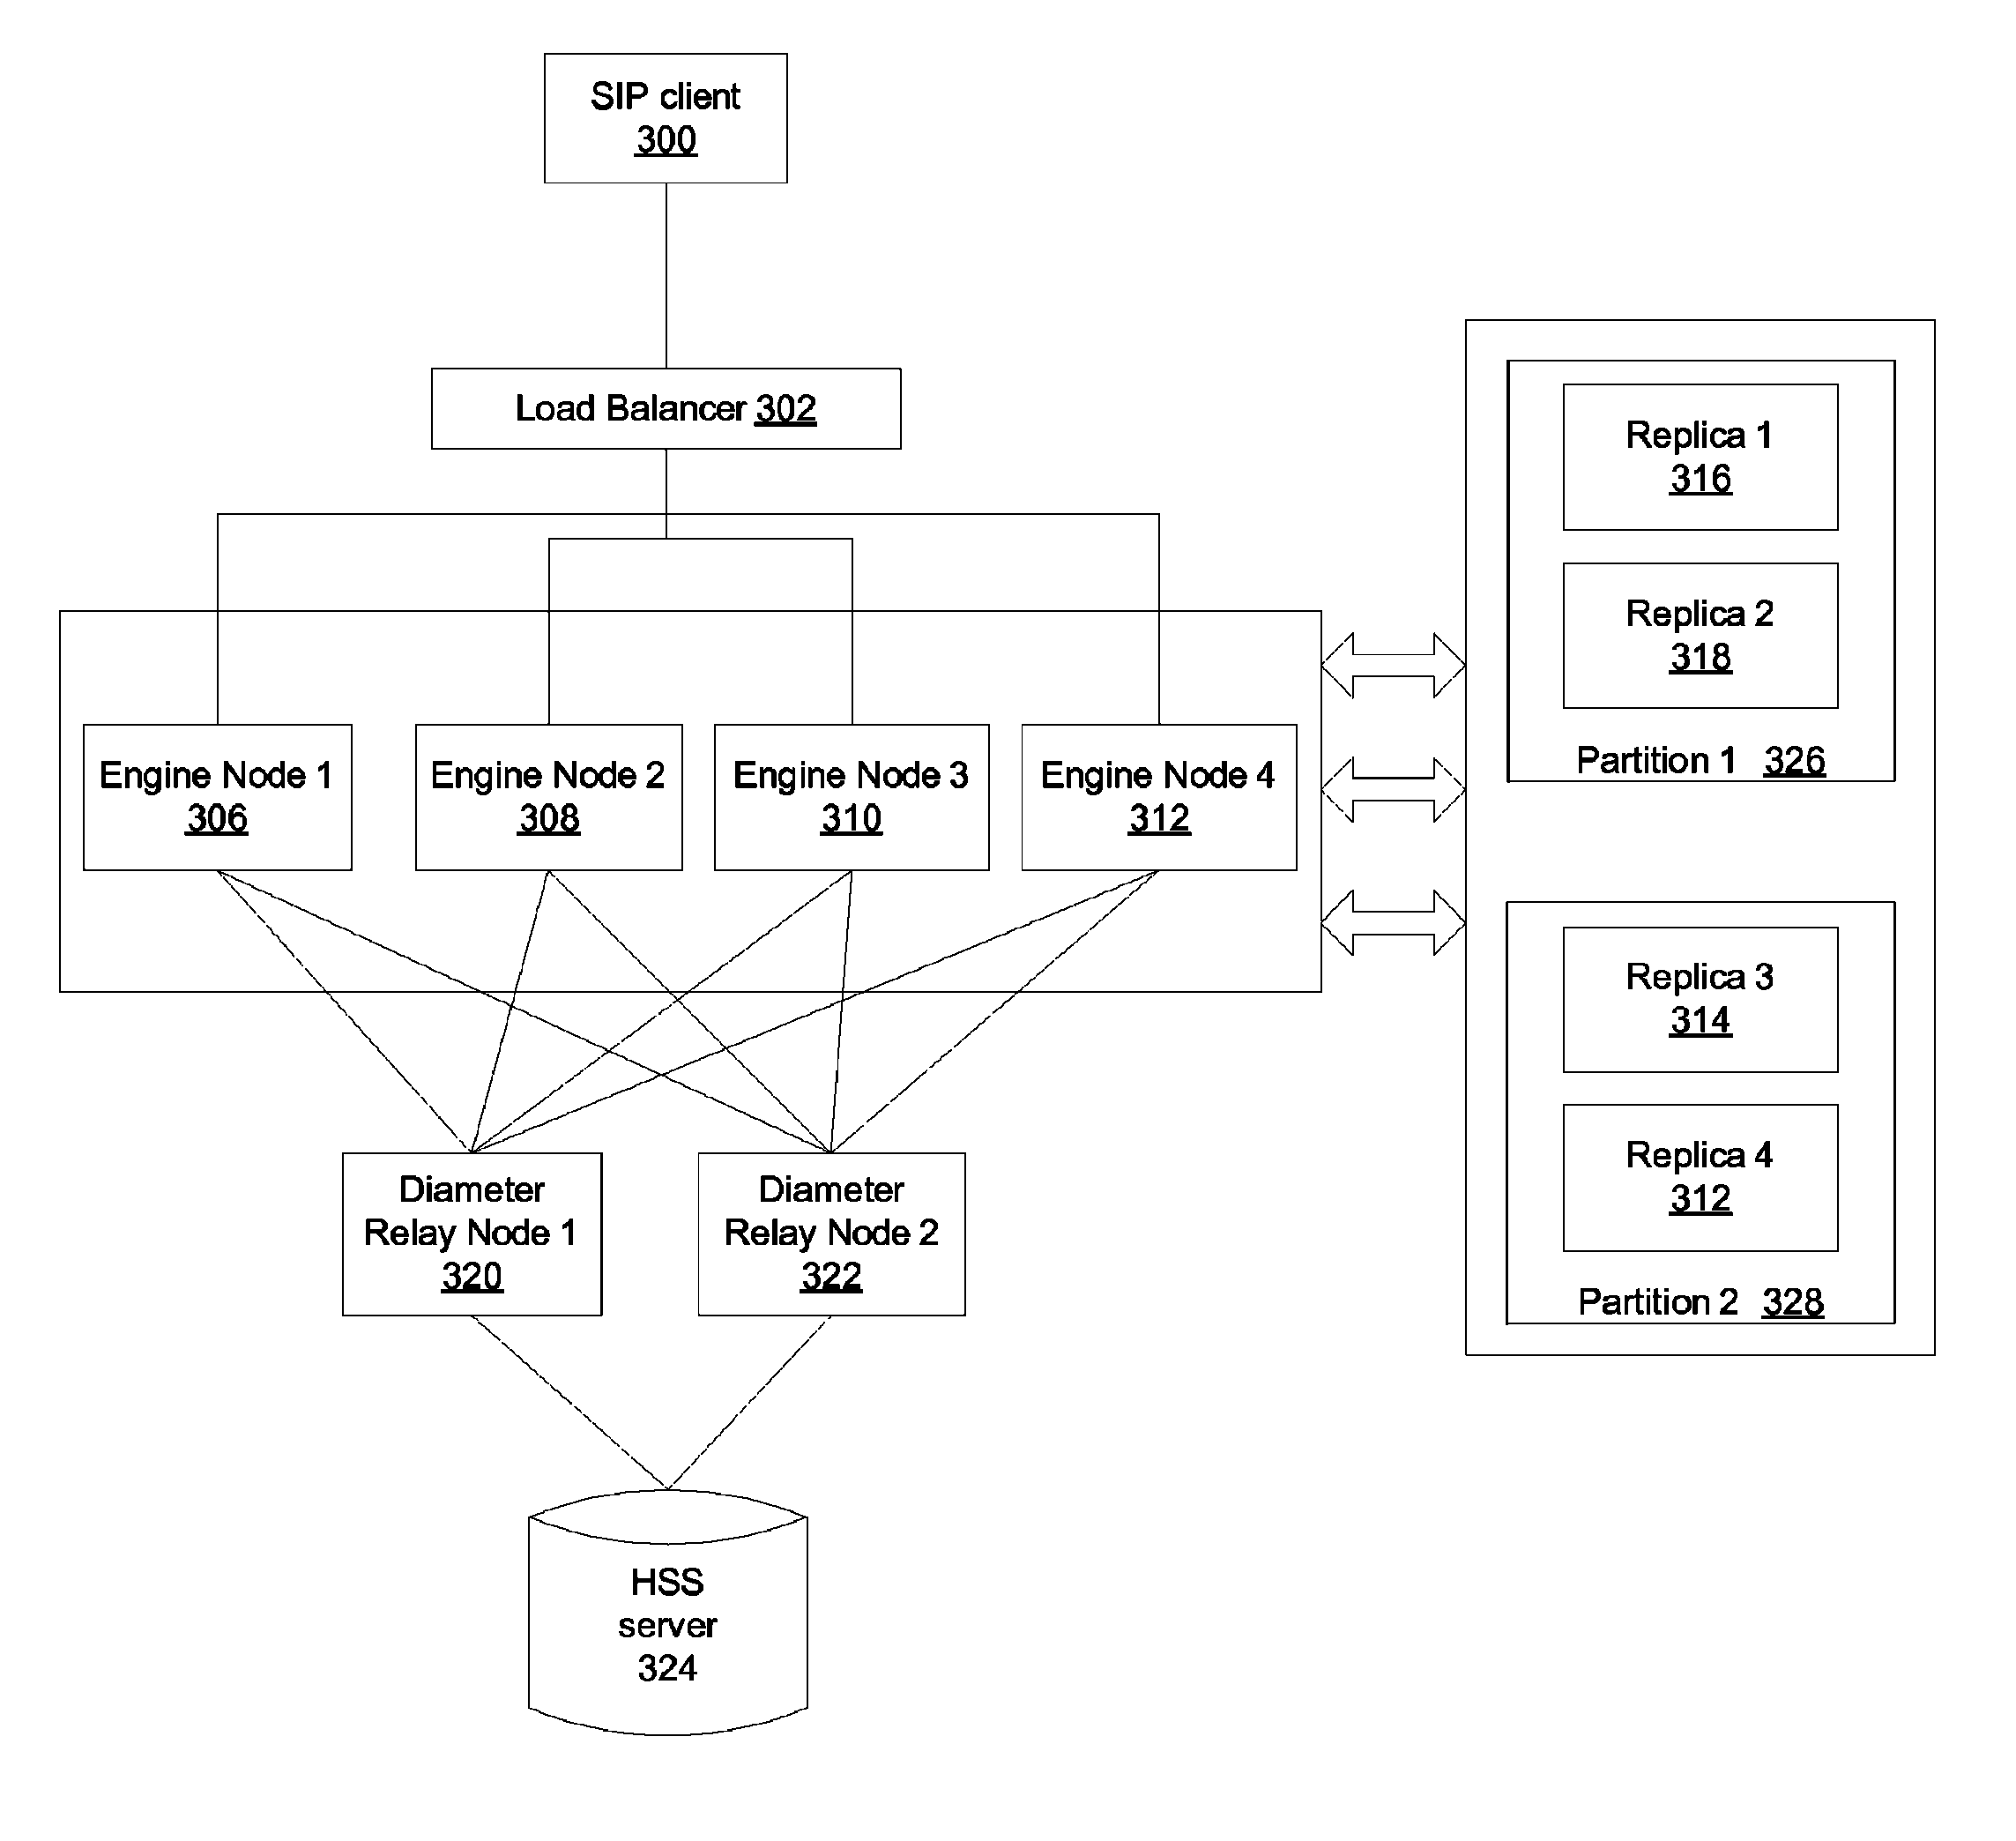 Diameter protocol and SH interface support for SIP server architecture